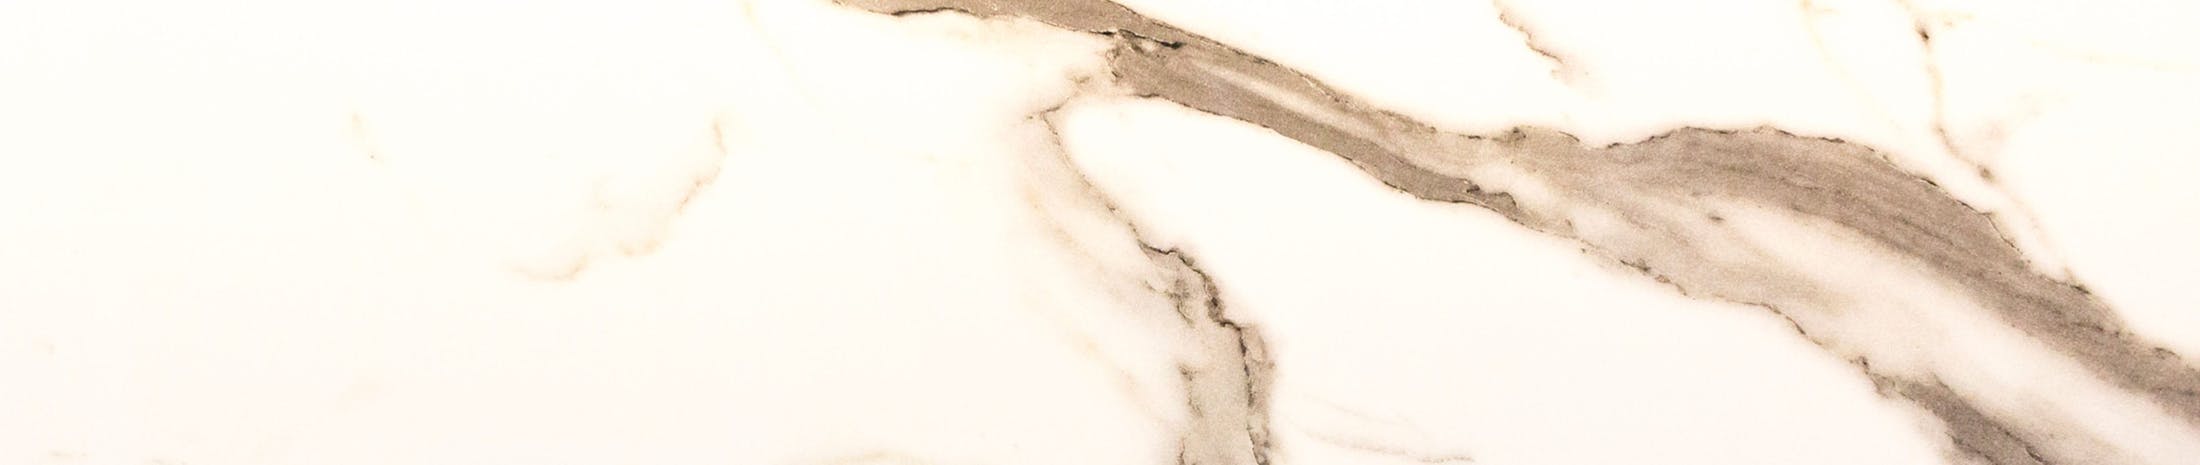 Aesthetic image of marble